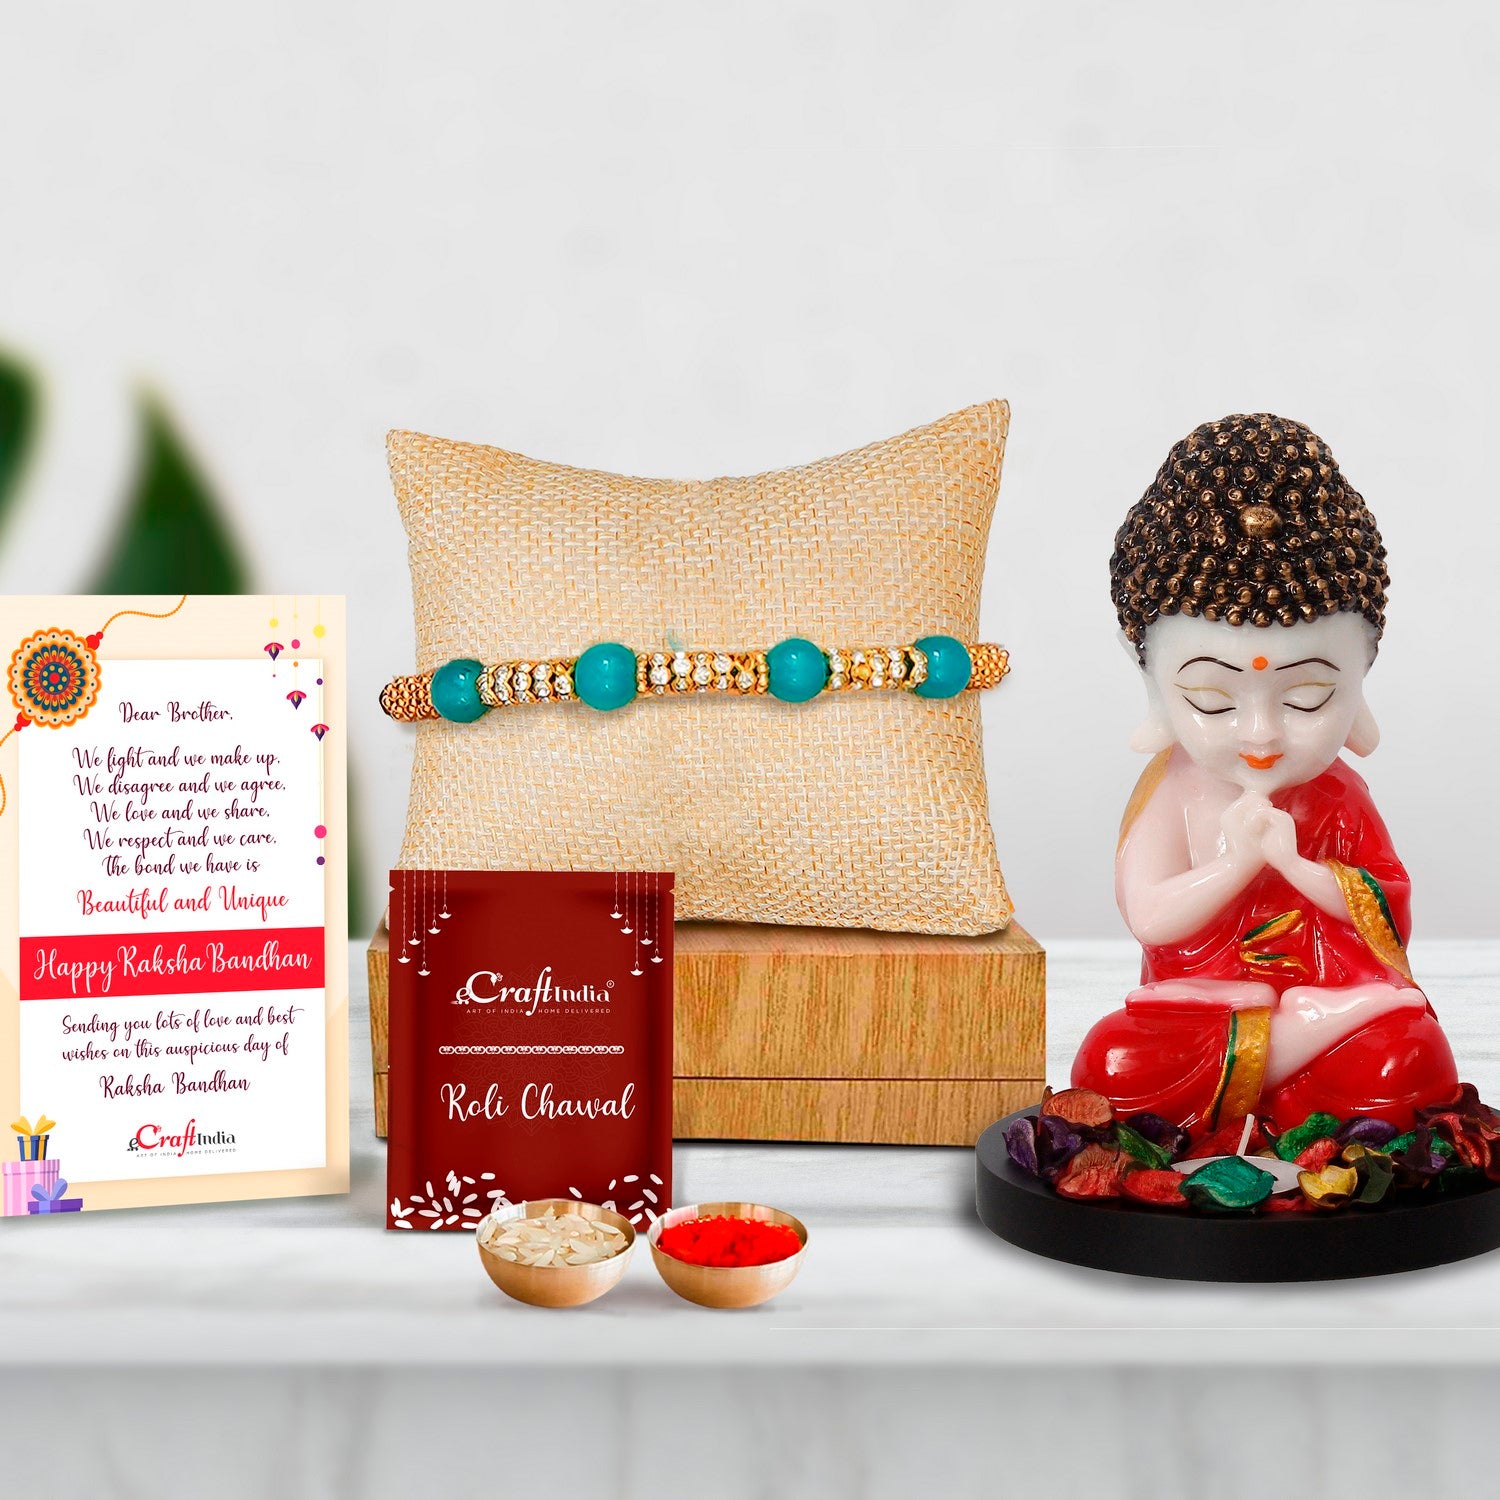 Designer Pearl Rakhi with Praying Red Monk Buddha with Wooden Base, Fragranced Petals and Tealight and Roli Chawal Pack, Best Wishes Greeting Card